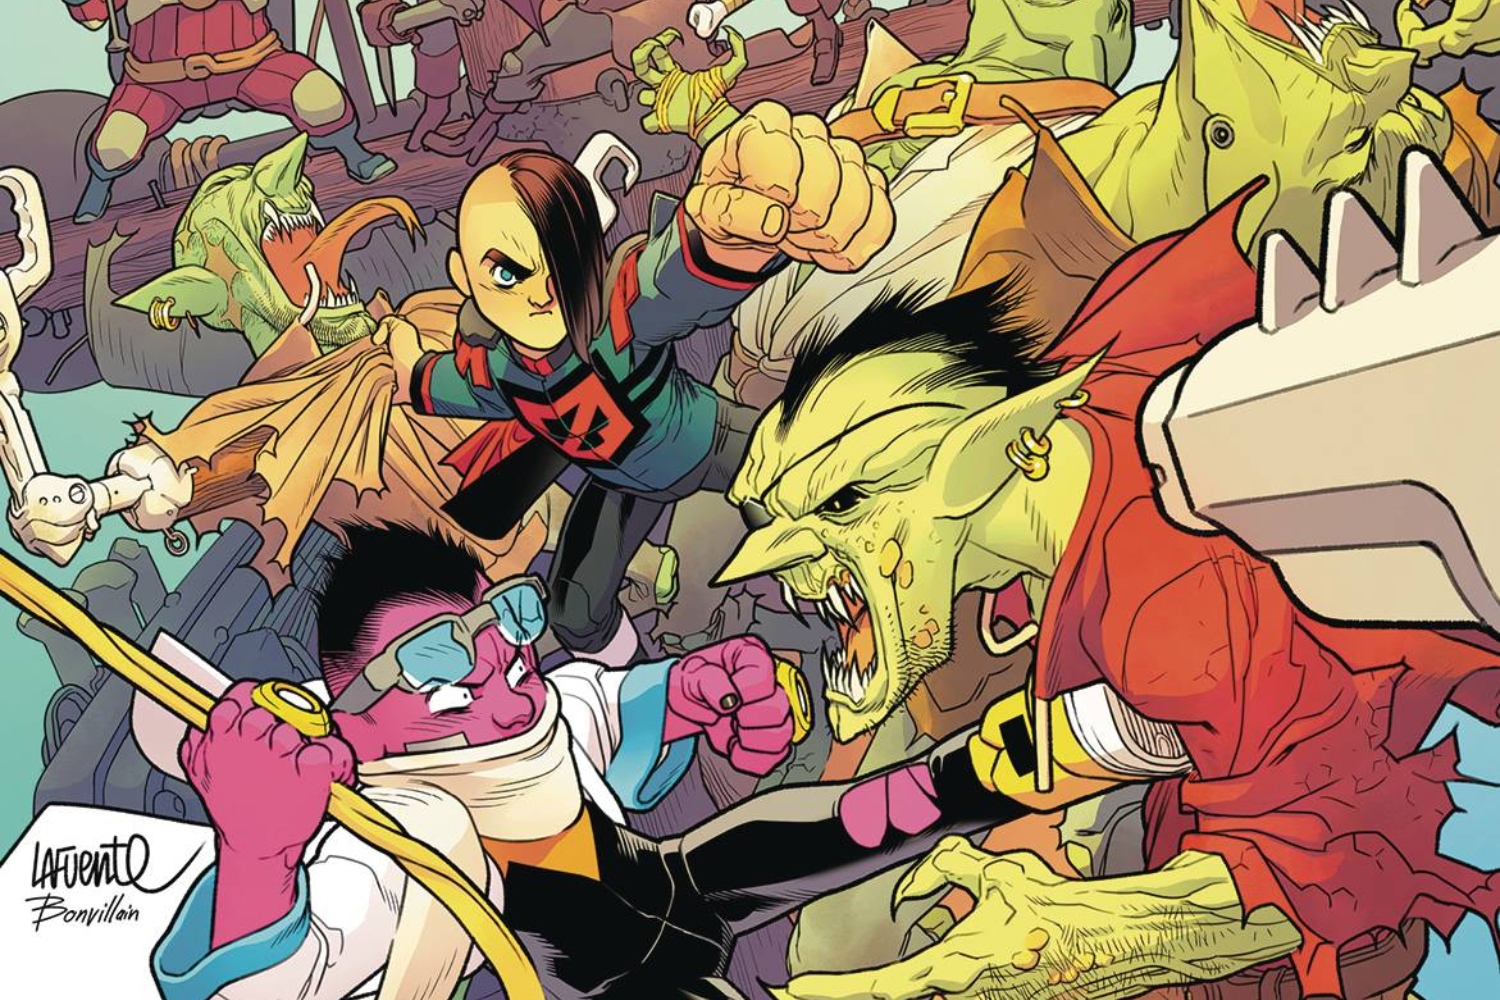 'Sinister Sons' #4 is truly a whale of a time